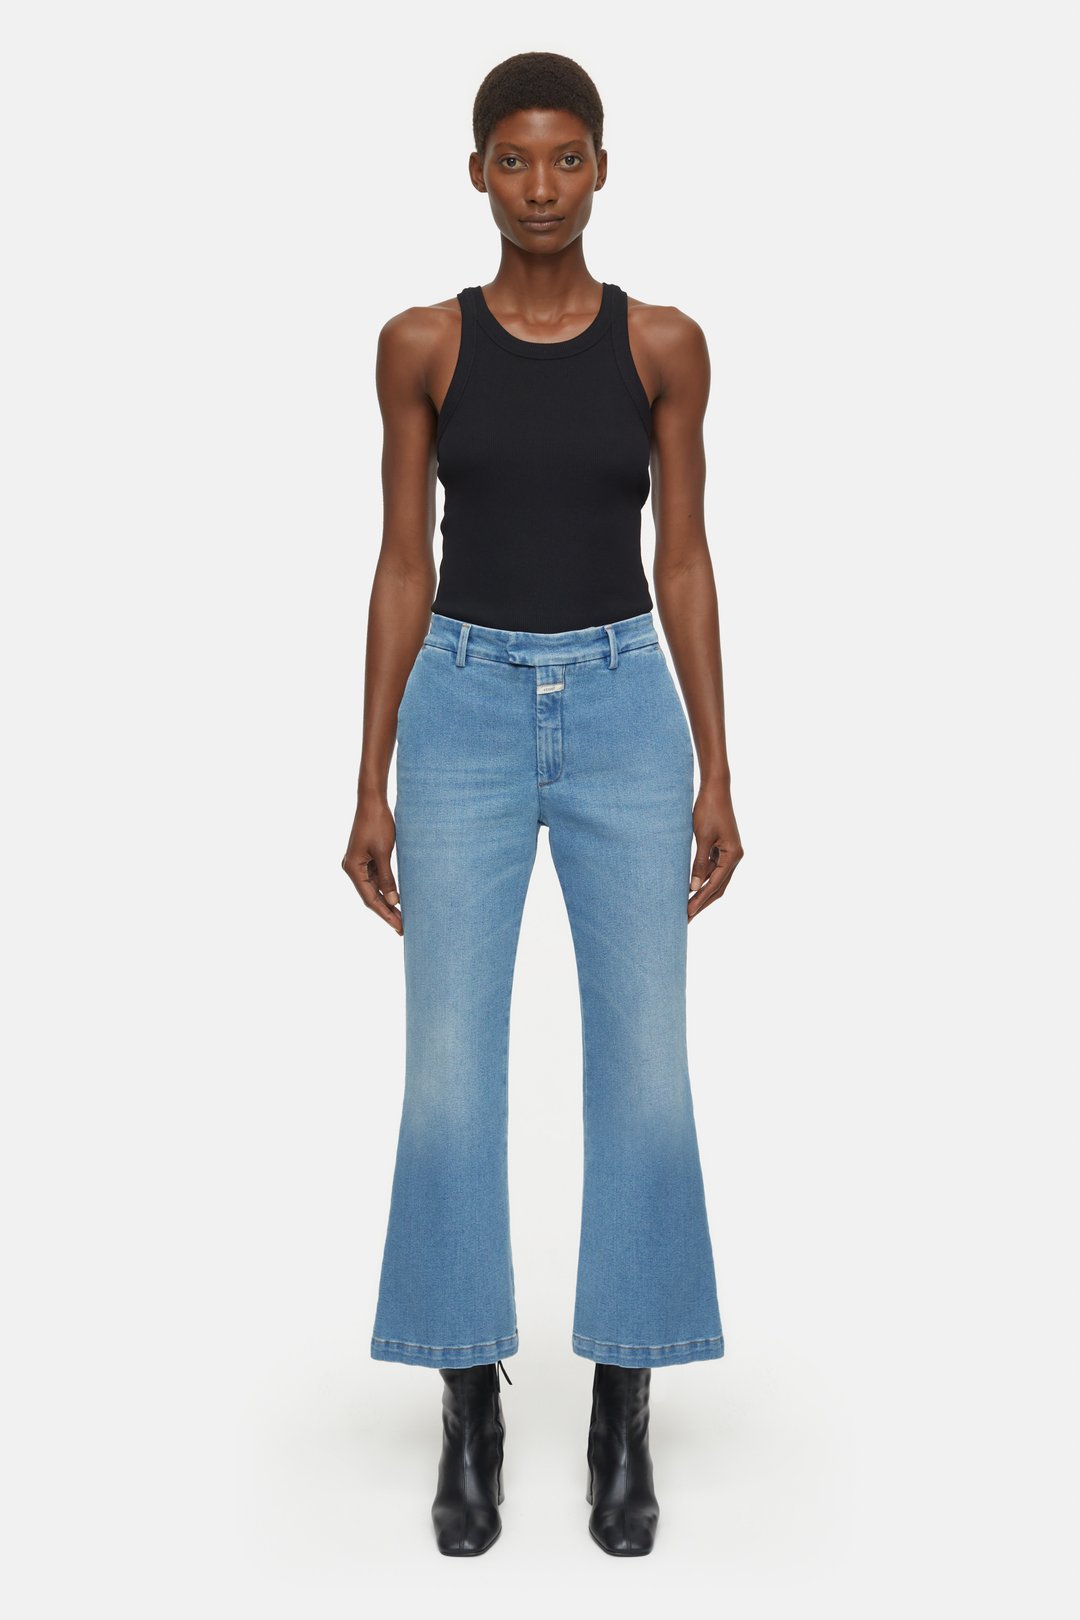 STYLE CLOSED RELAXED WHARTON | - JEANS NAME